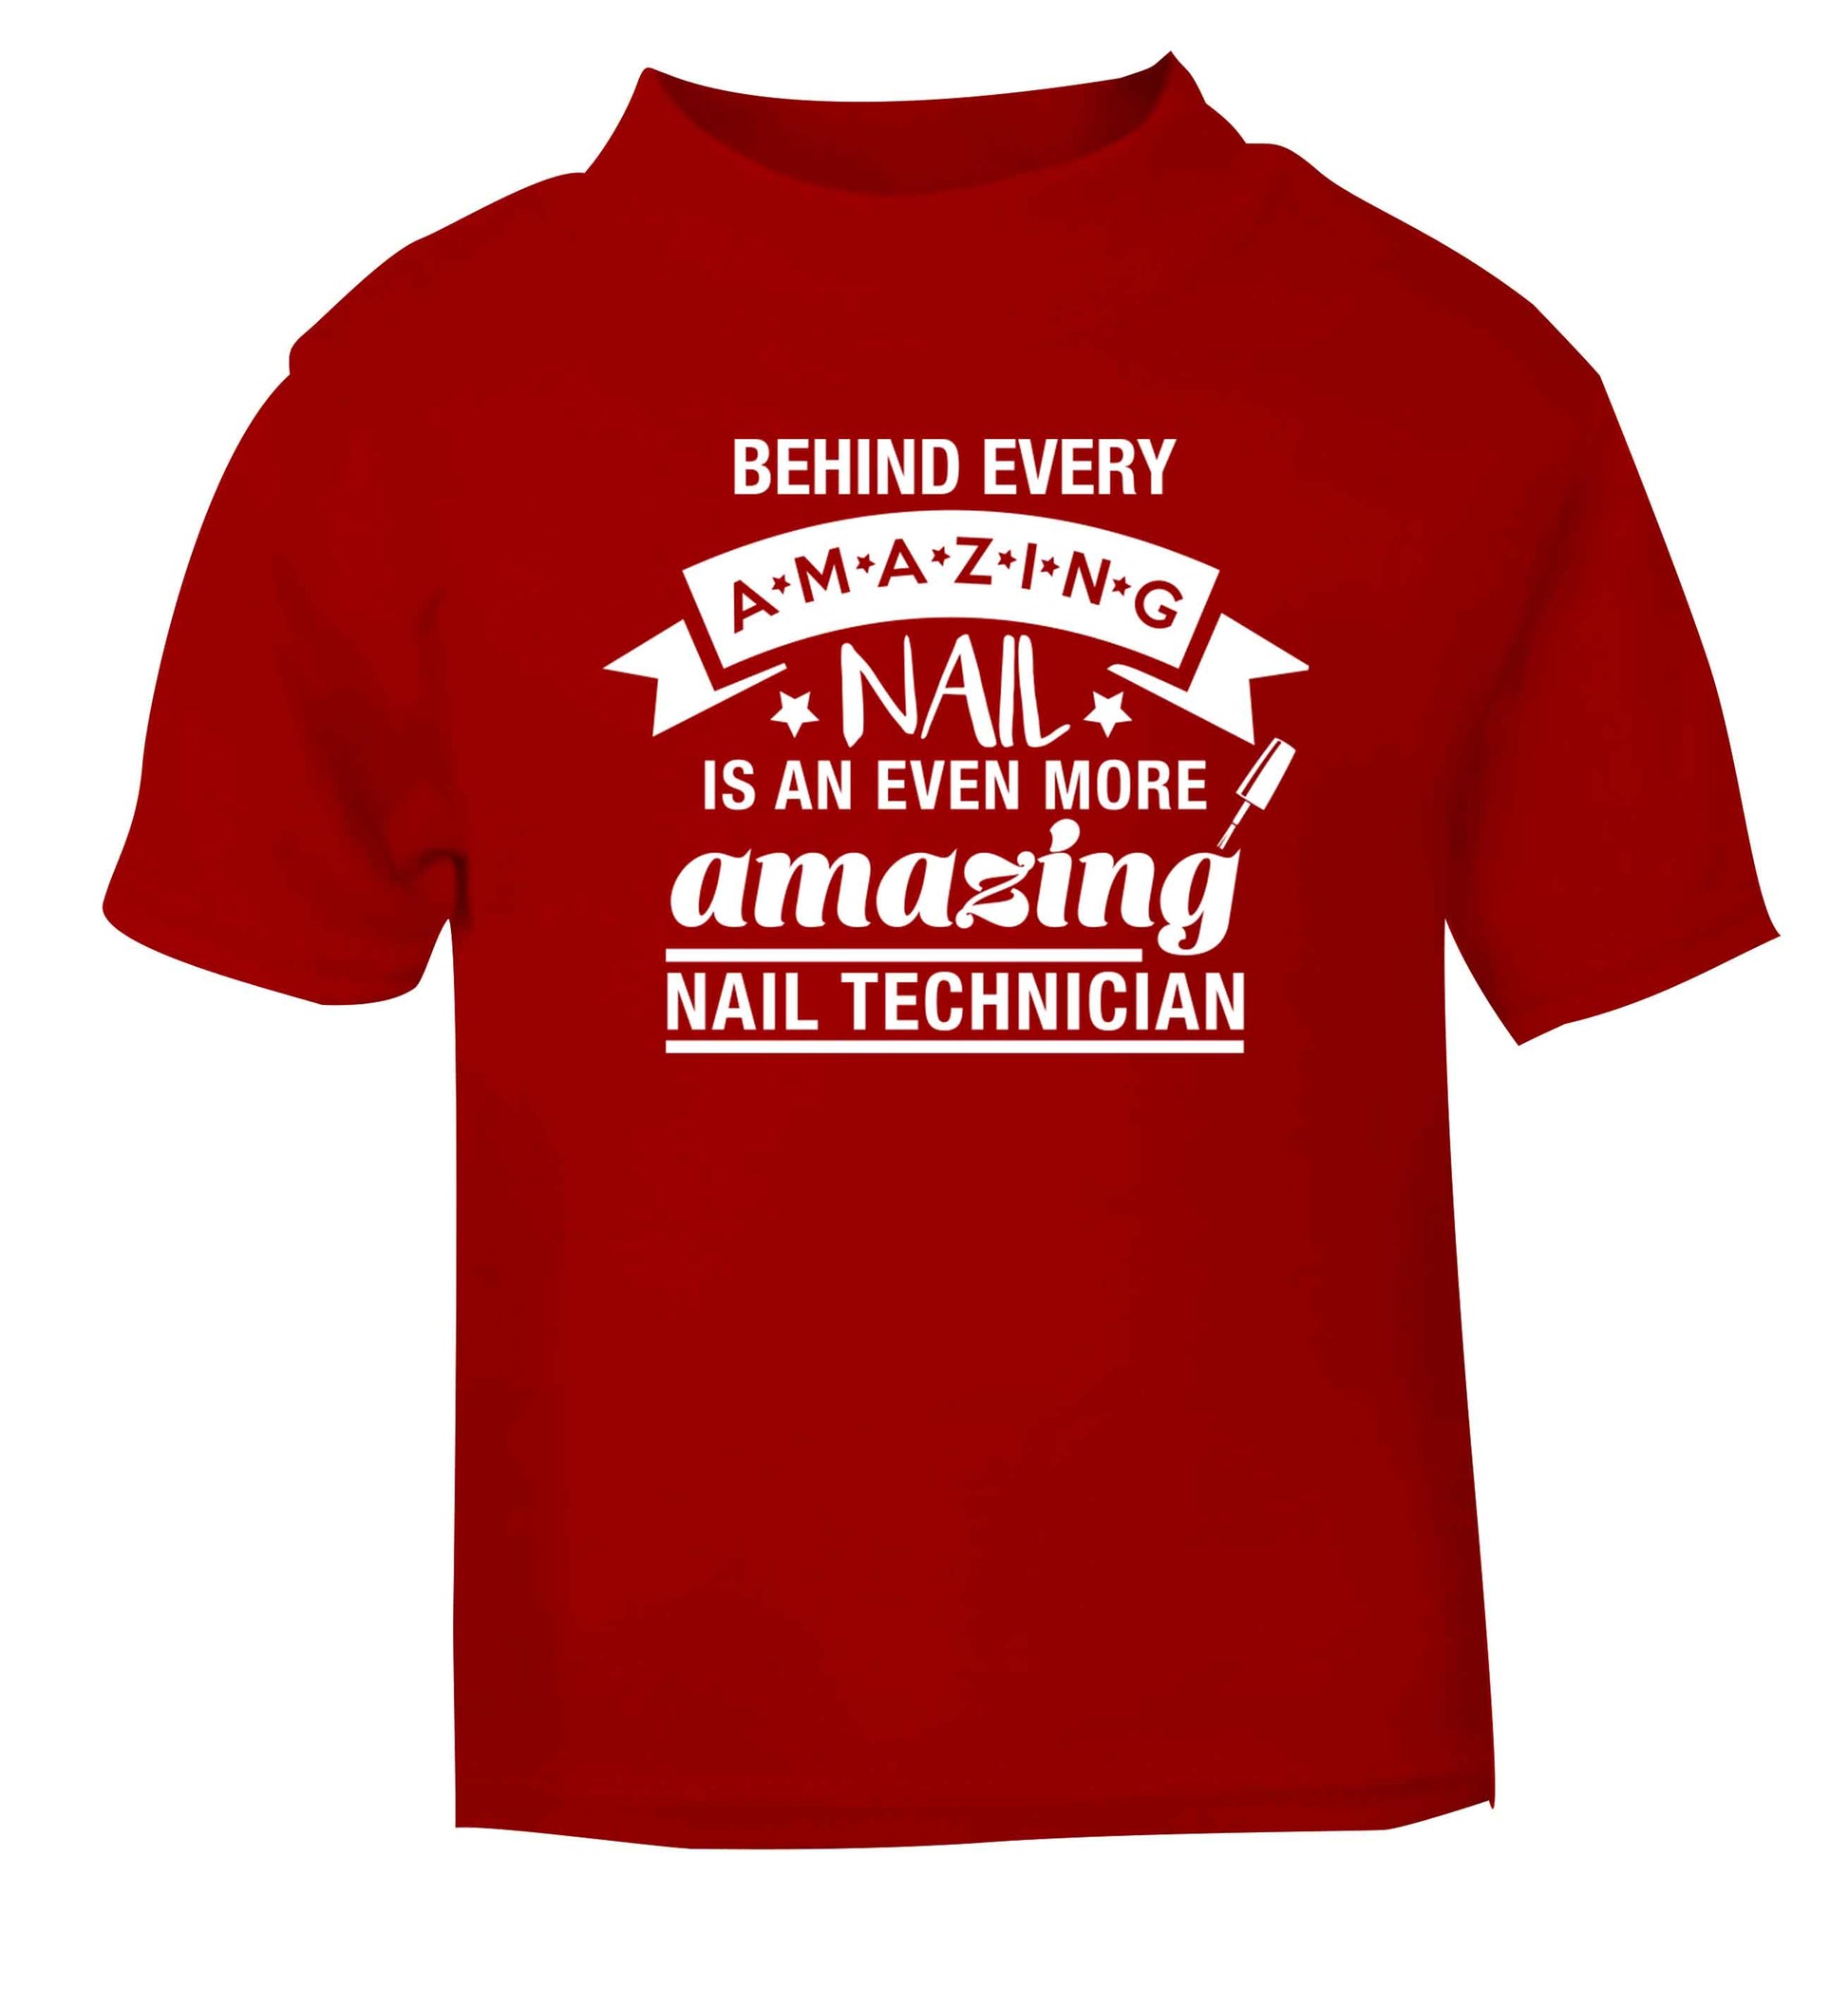 Behind every amazing nail is an even more amazing nail technician red baby toddler Tshirt 2 Years